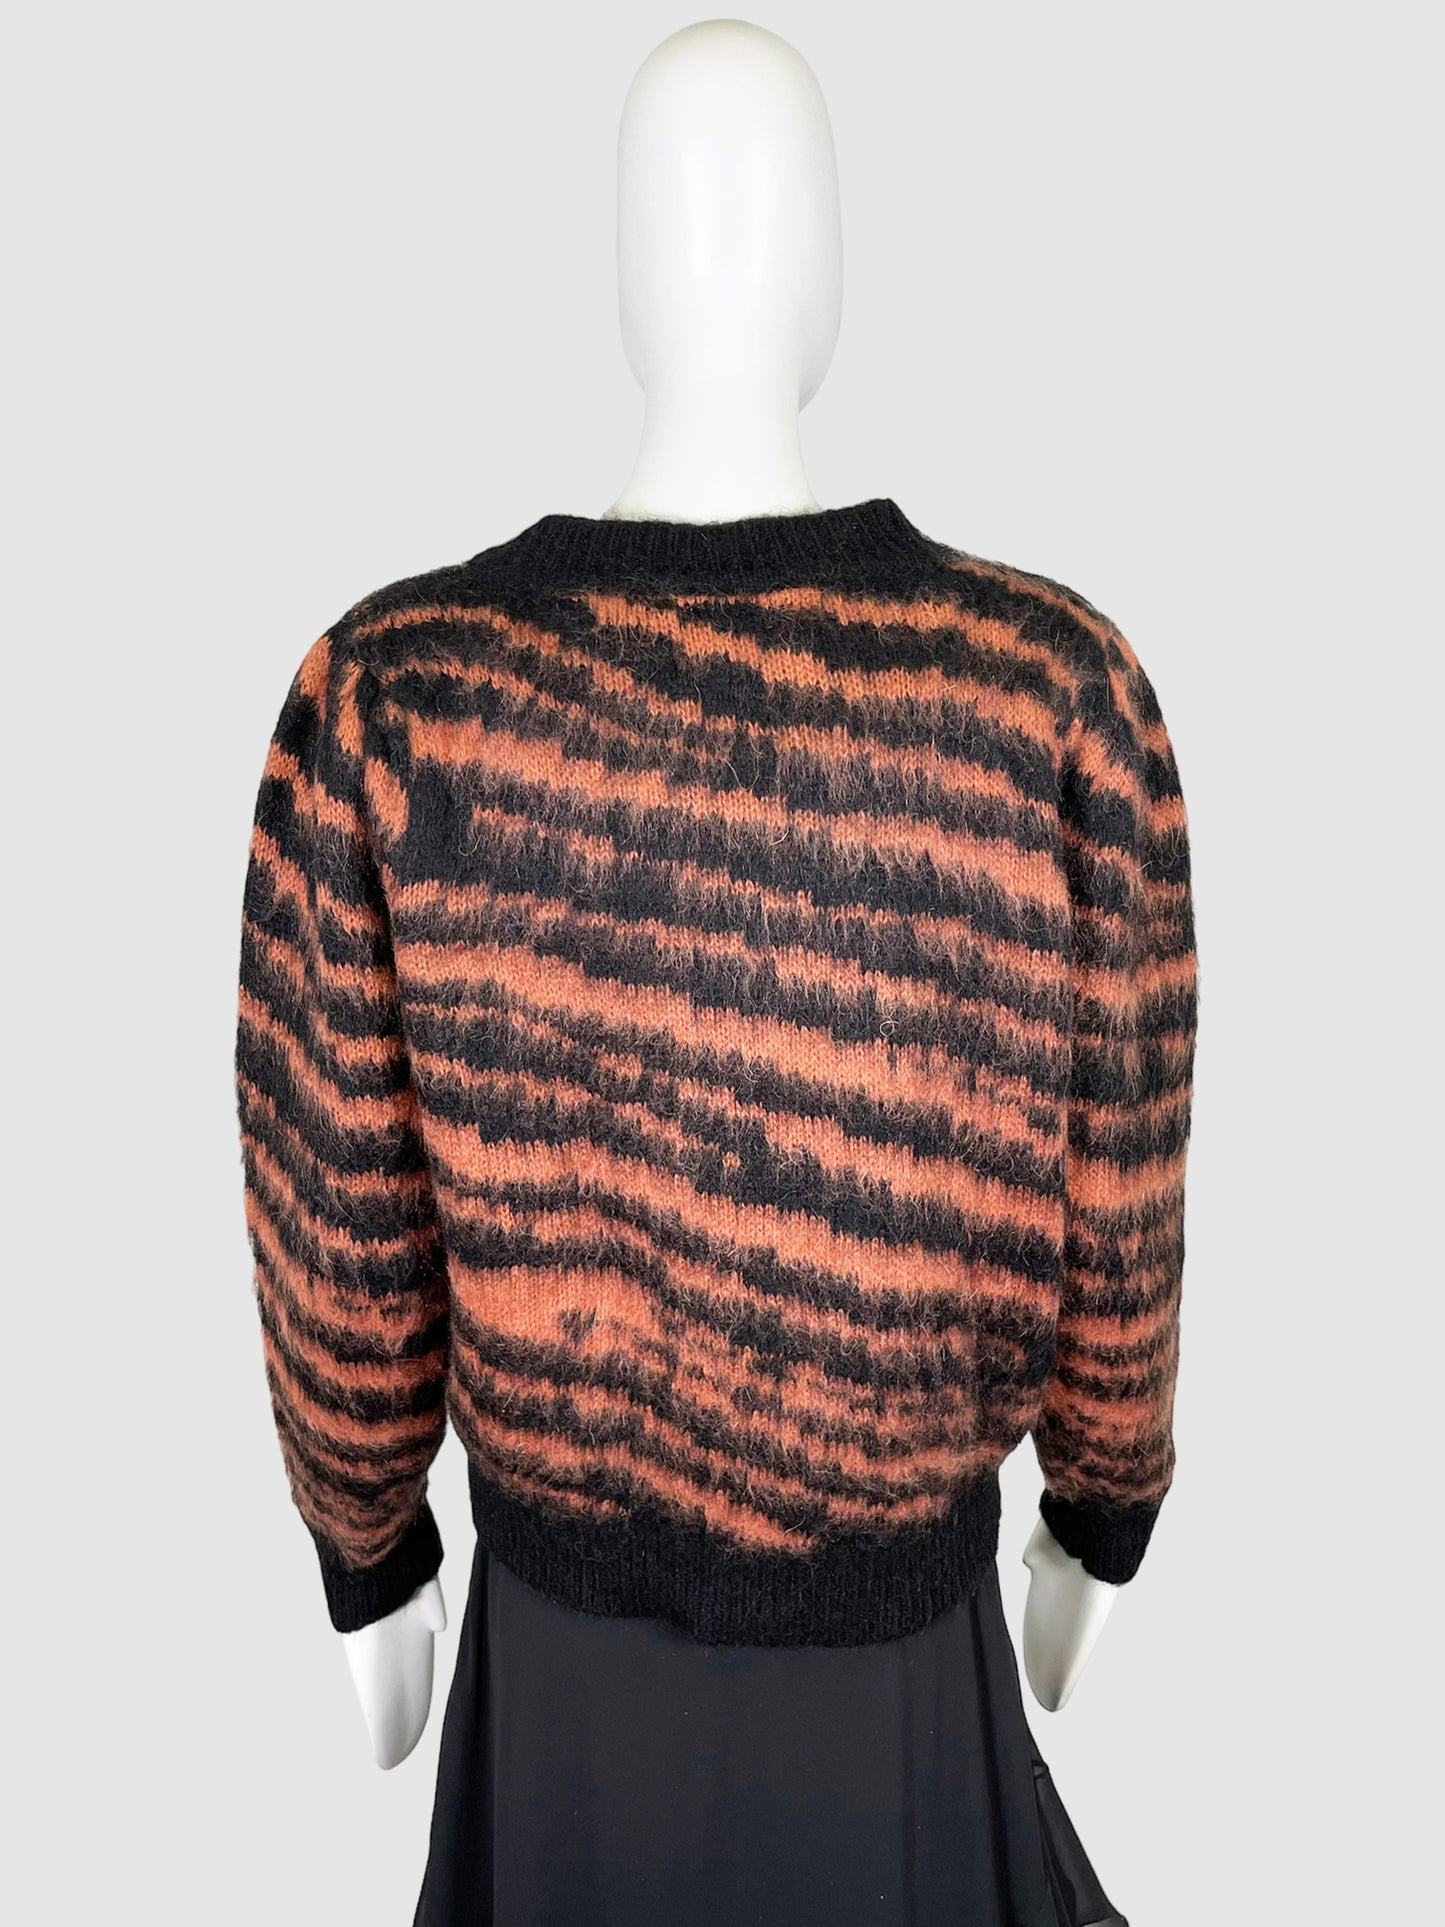 Sandro Striped Mohair Sweater - Size 2